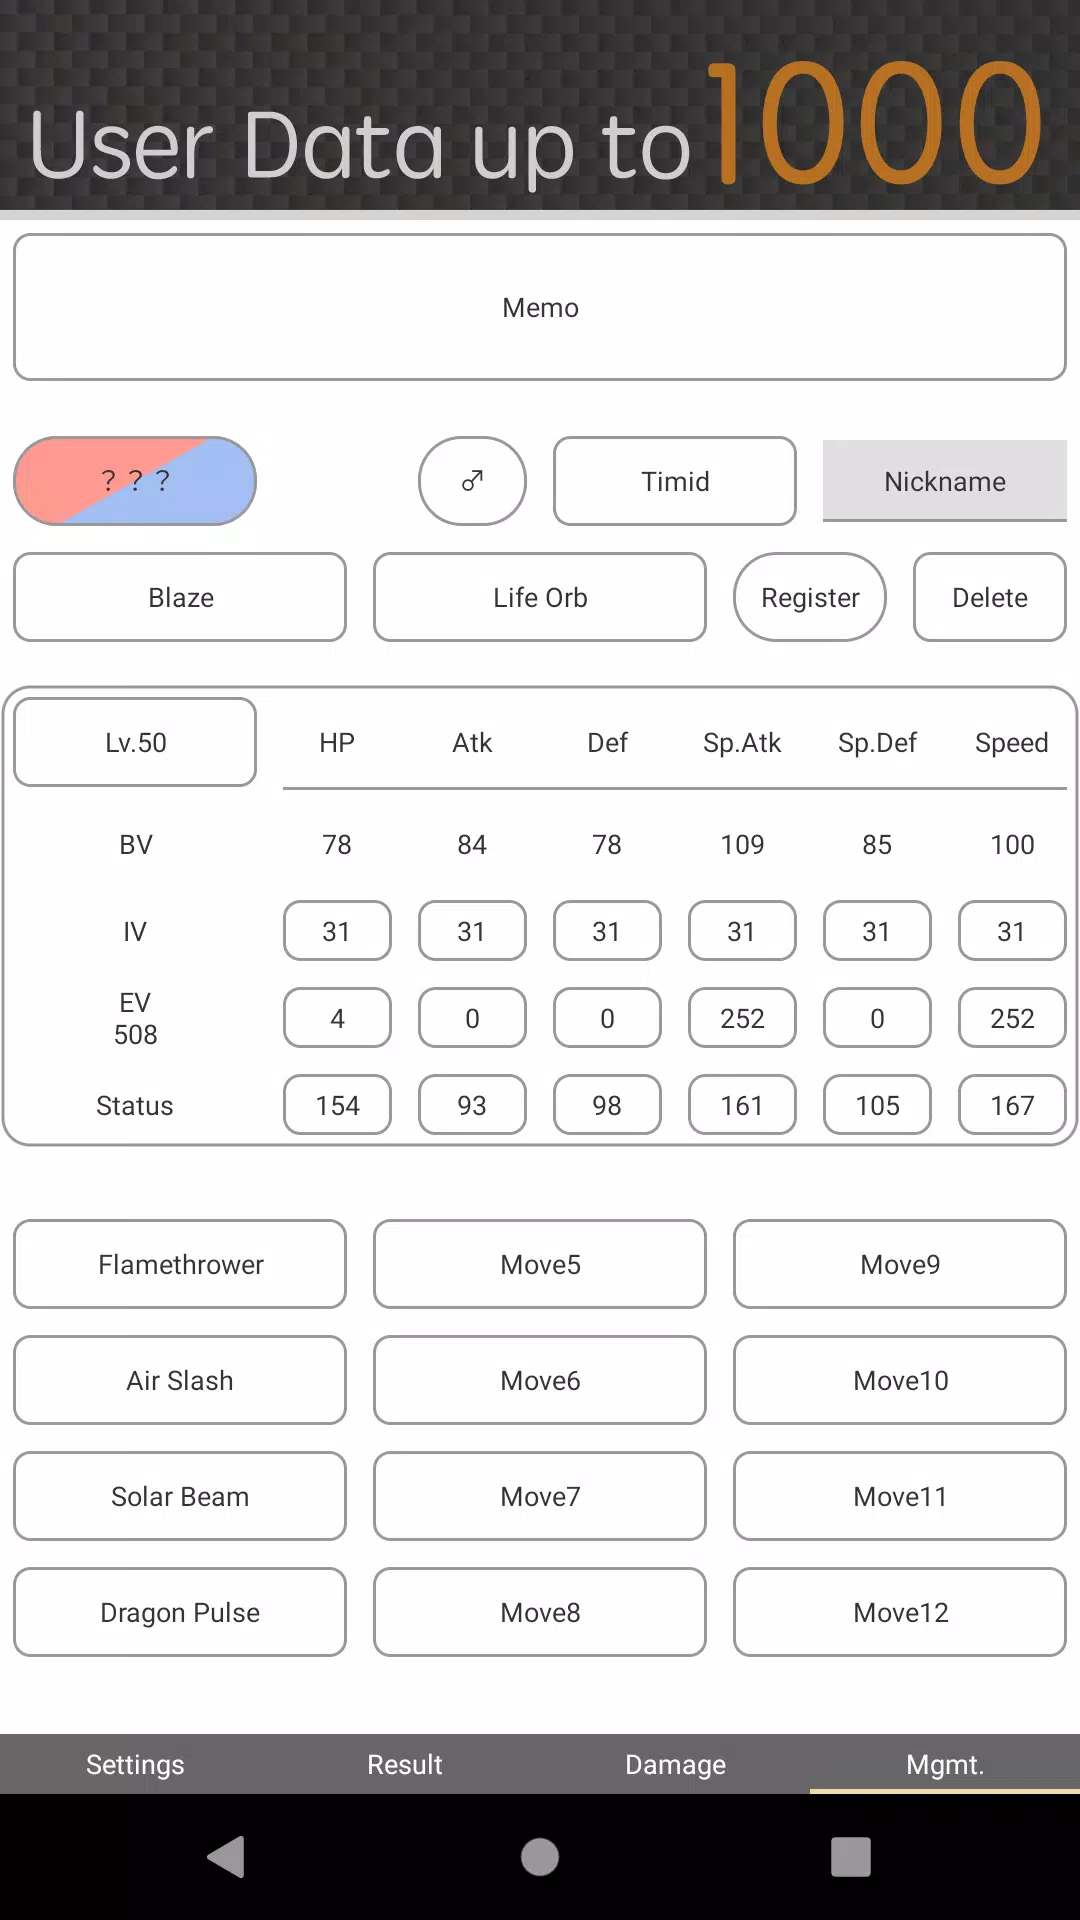 VS SV Damage Calculator for Android - Free App Download